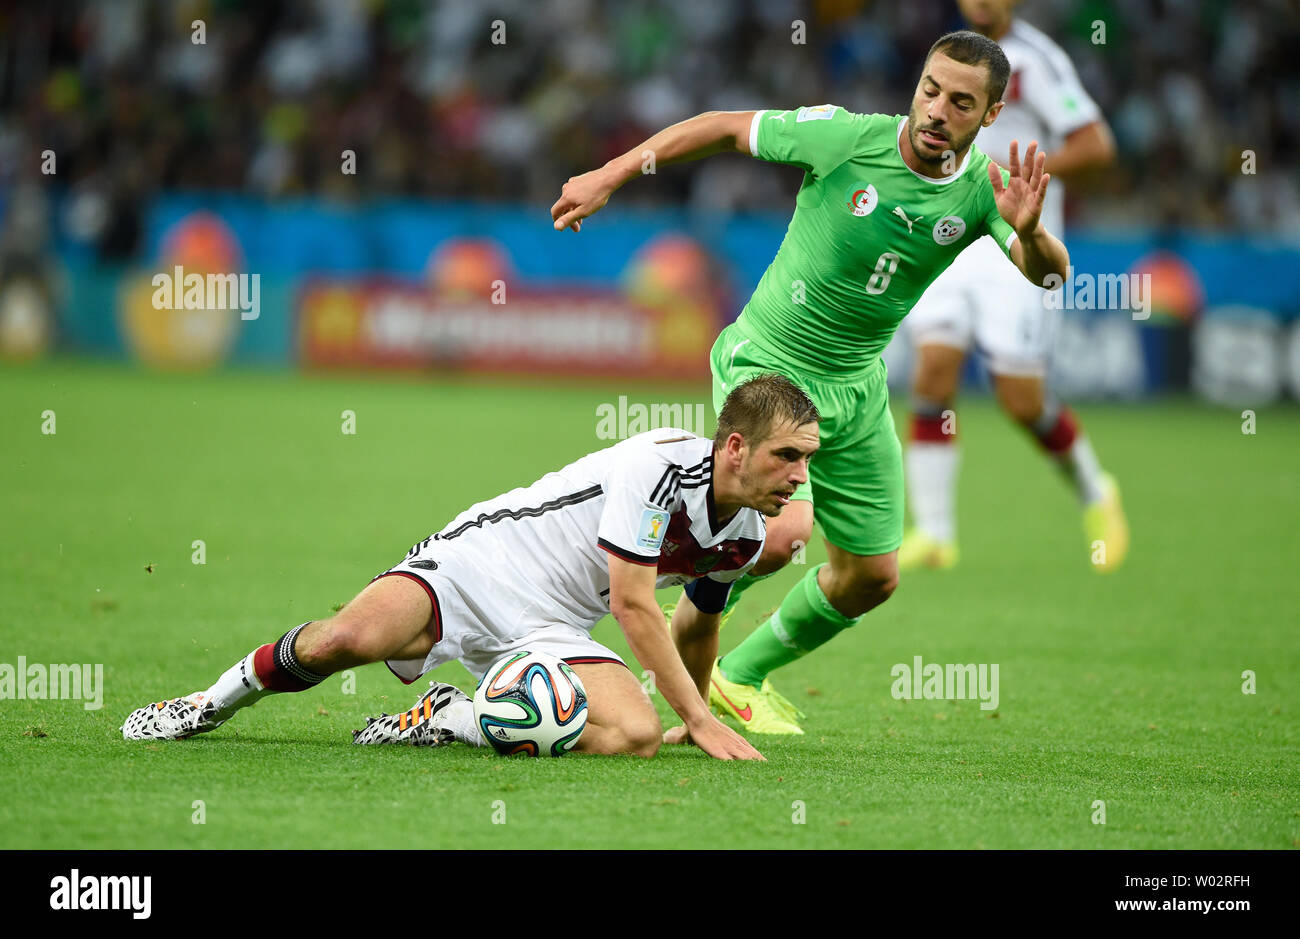 Philipp Lahm (L) of Germany competes with Djamel Mesbah of Algeria during the 2014 FIFA World Cup Round of 16 match at the Estadio Beira-Rio in Porto Alegre, Brazil on June 30, 2014. UPI/Chris Brunskill Stock Photo